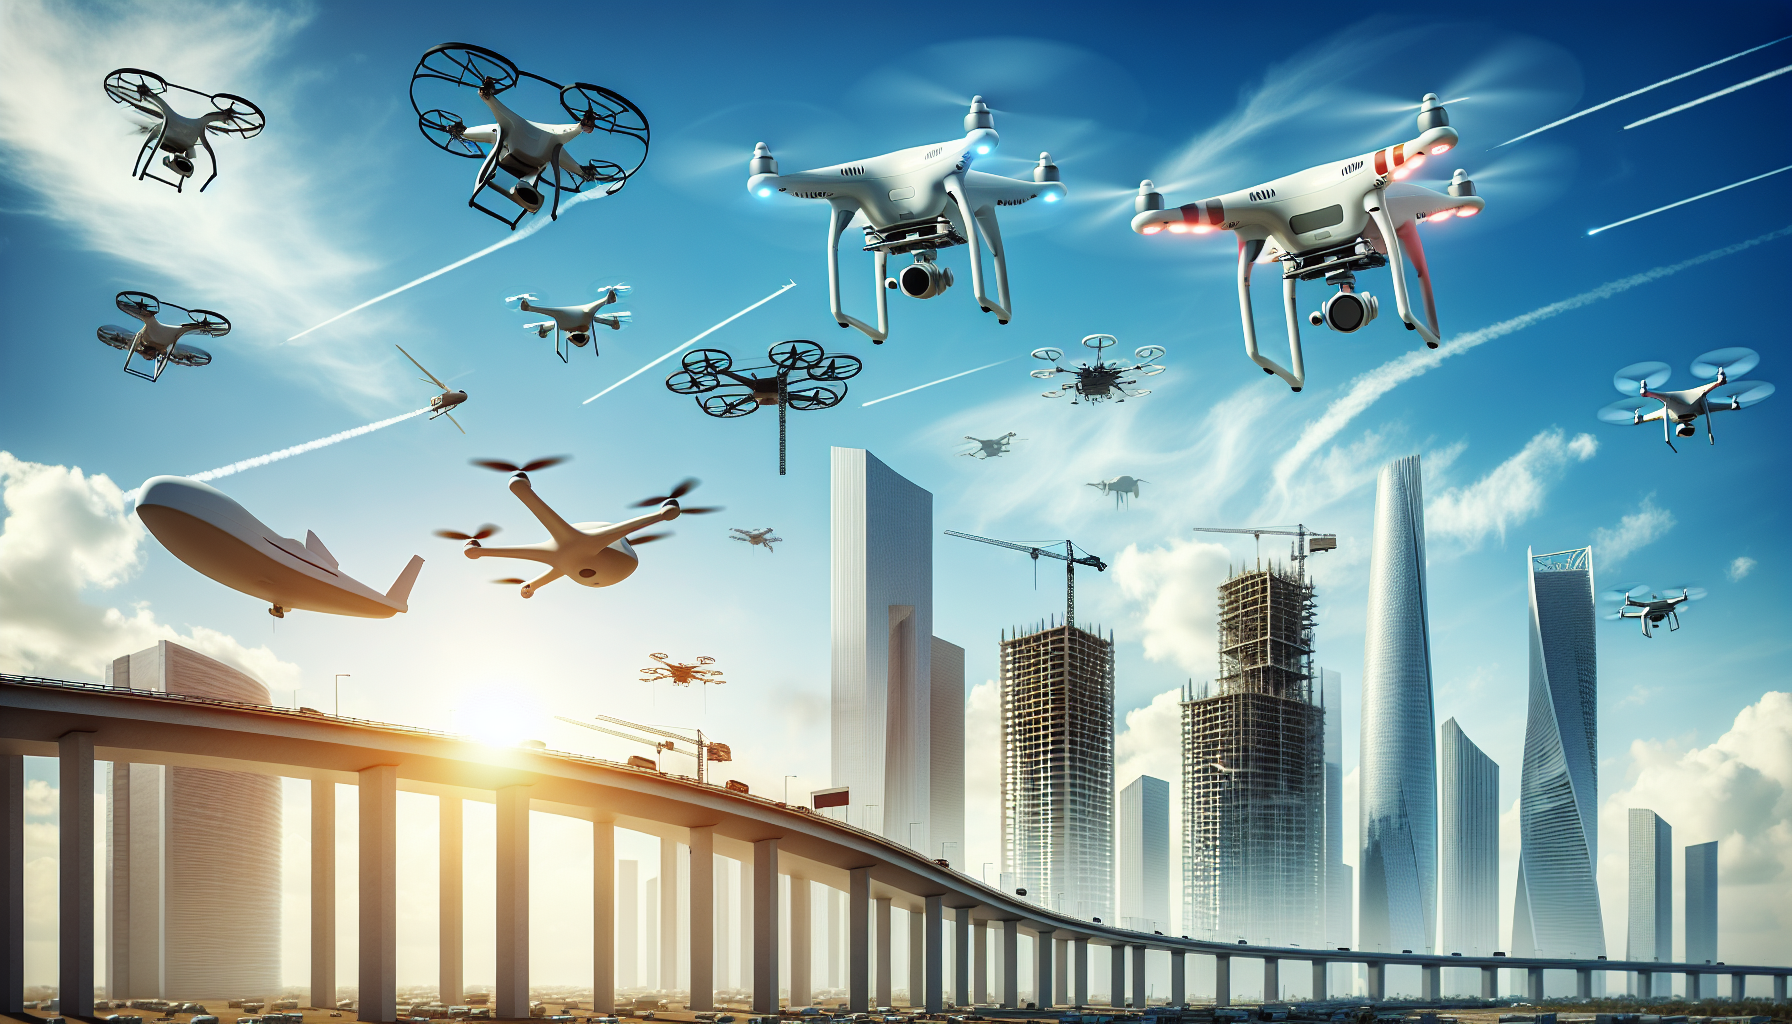 Various types of drones used in construction - multirotor, fixed-wing, and hybrid drones